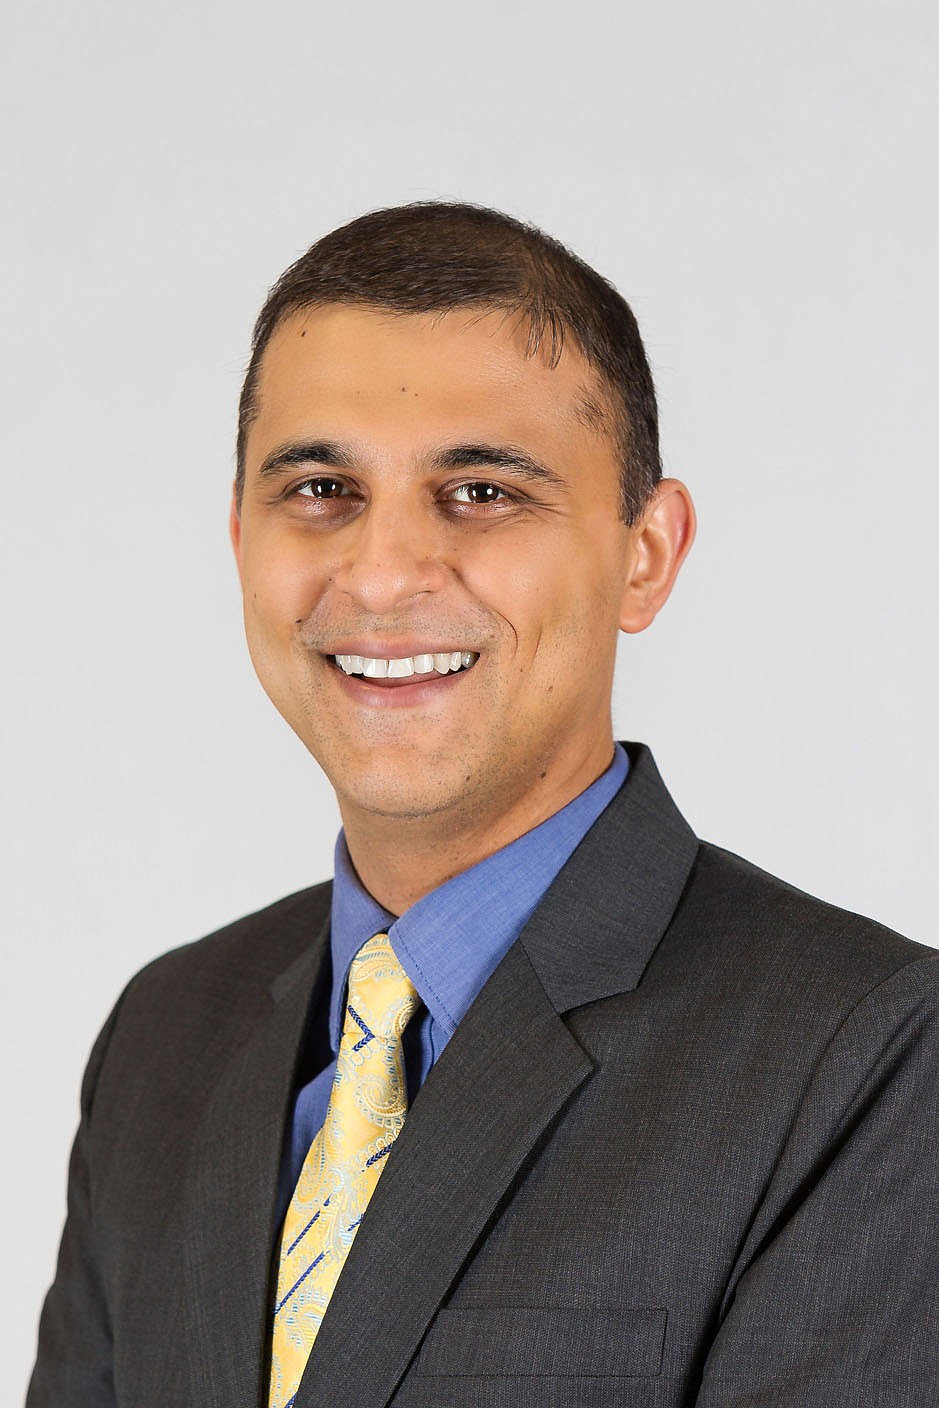 Dr. Rudhir Tandon, board-certified interventional cardiologist, recently joined the active medical staff of at Northwest Cardiology in Bentonville.